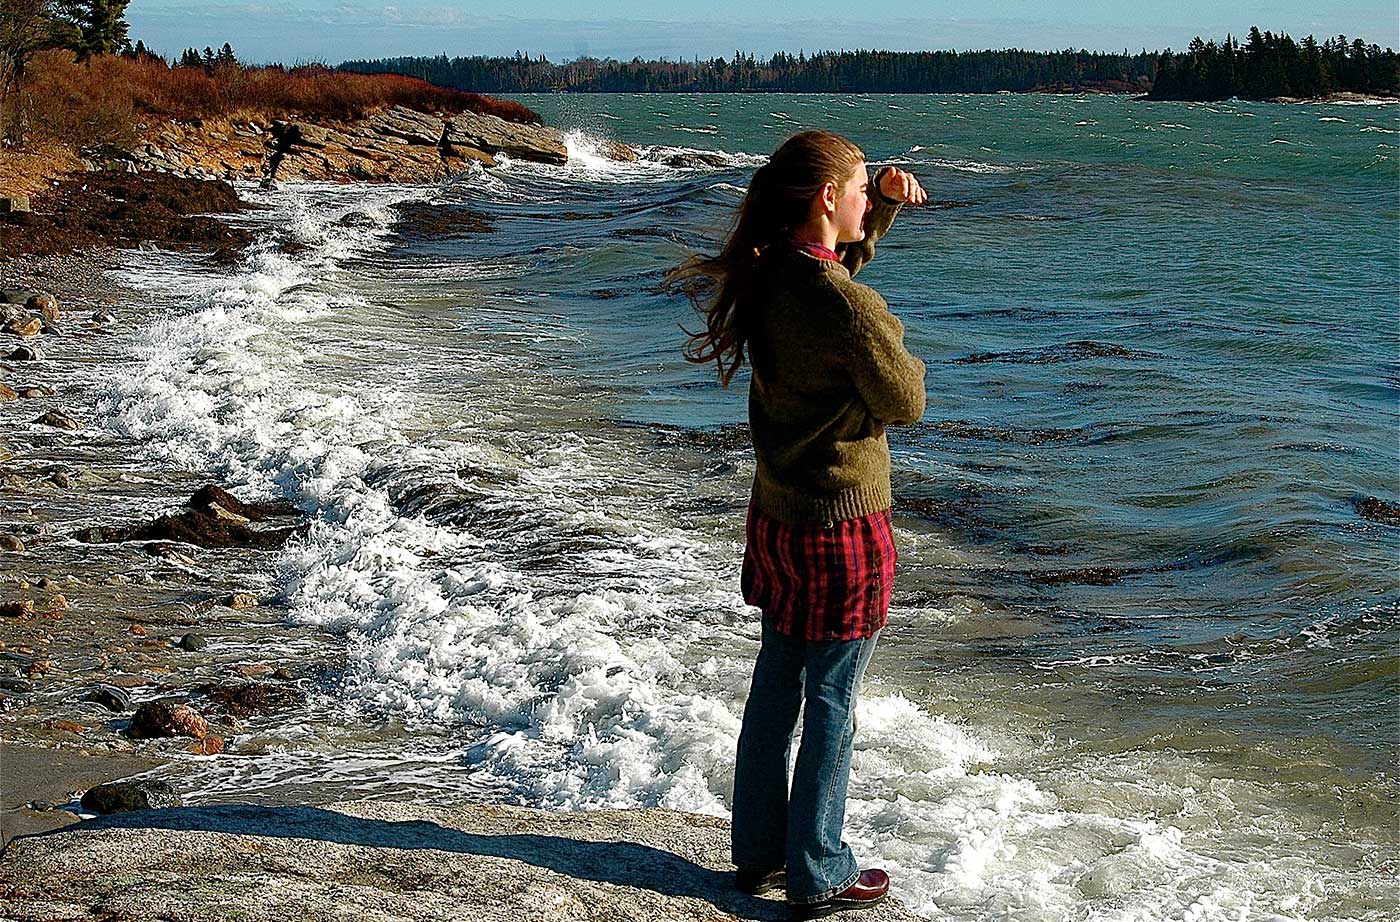 young woman standing in ocean waves looking out at ocean